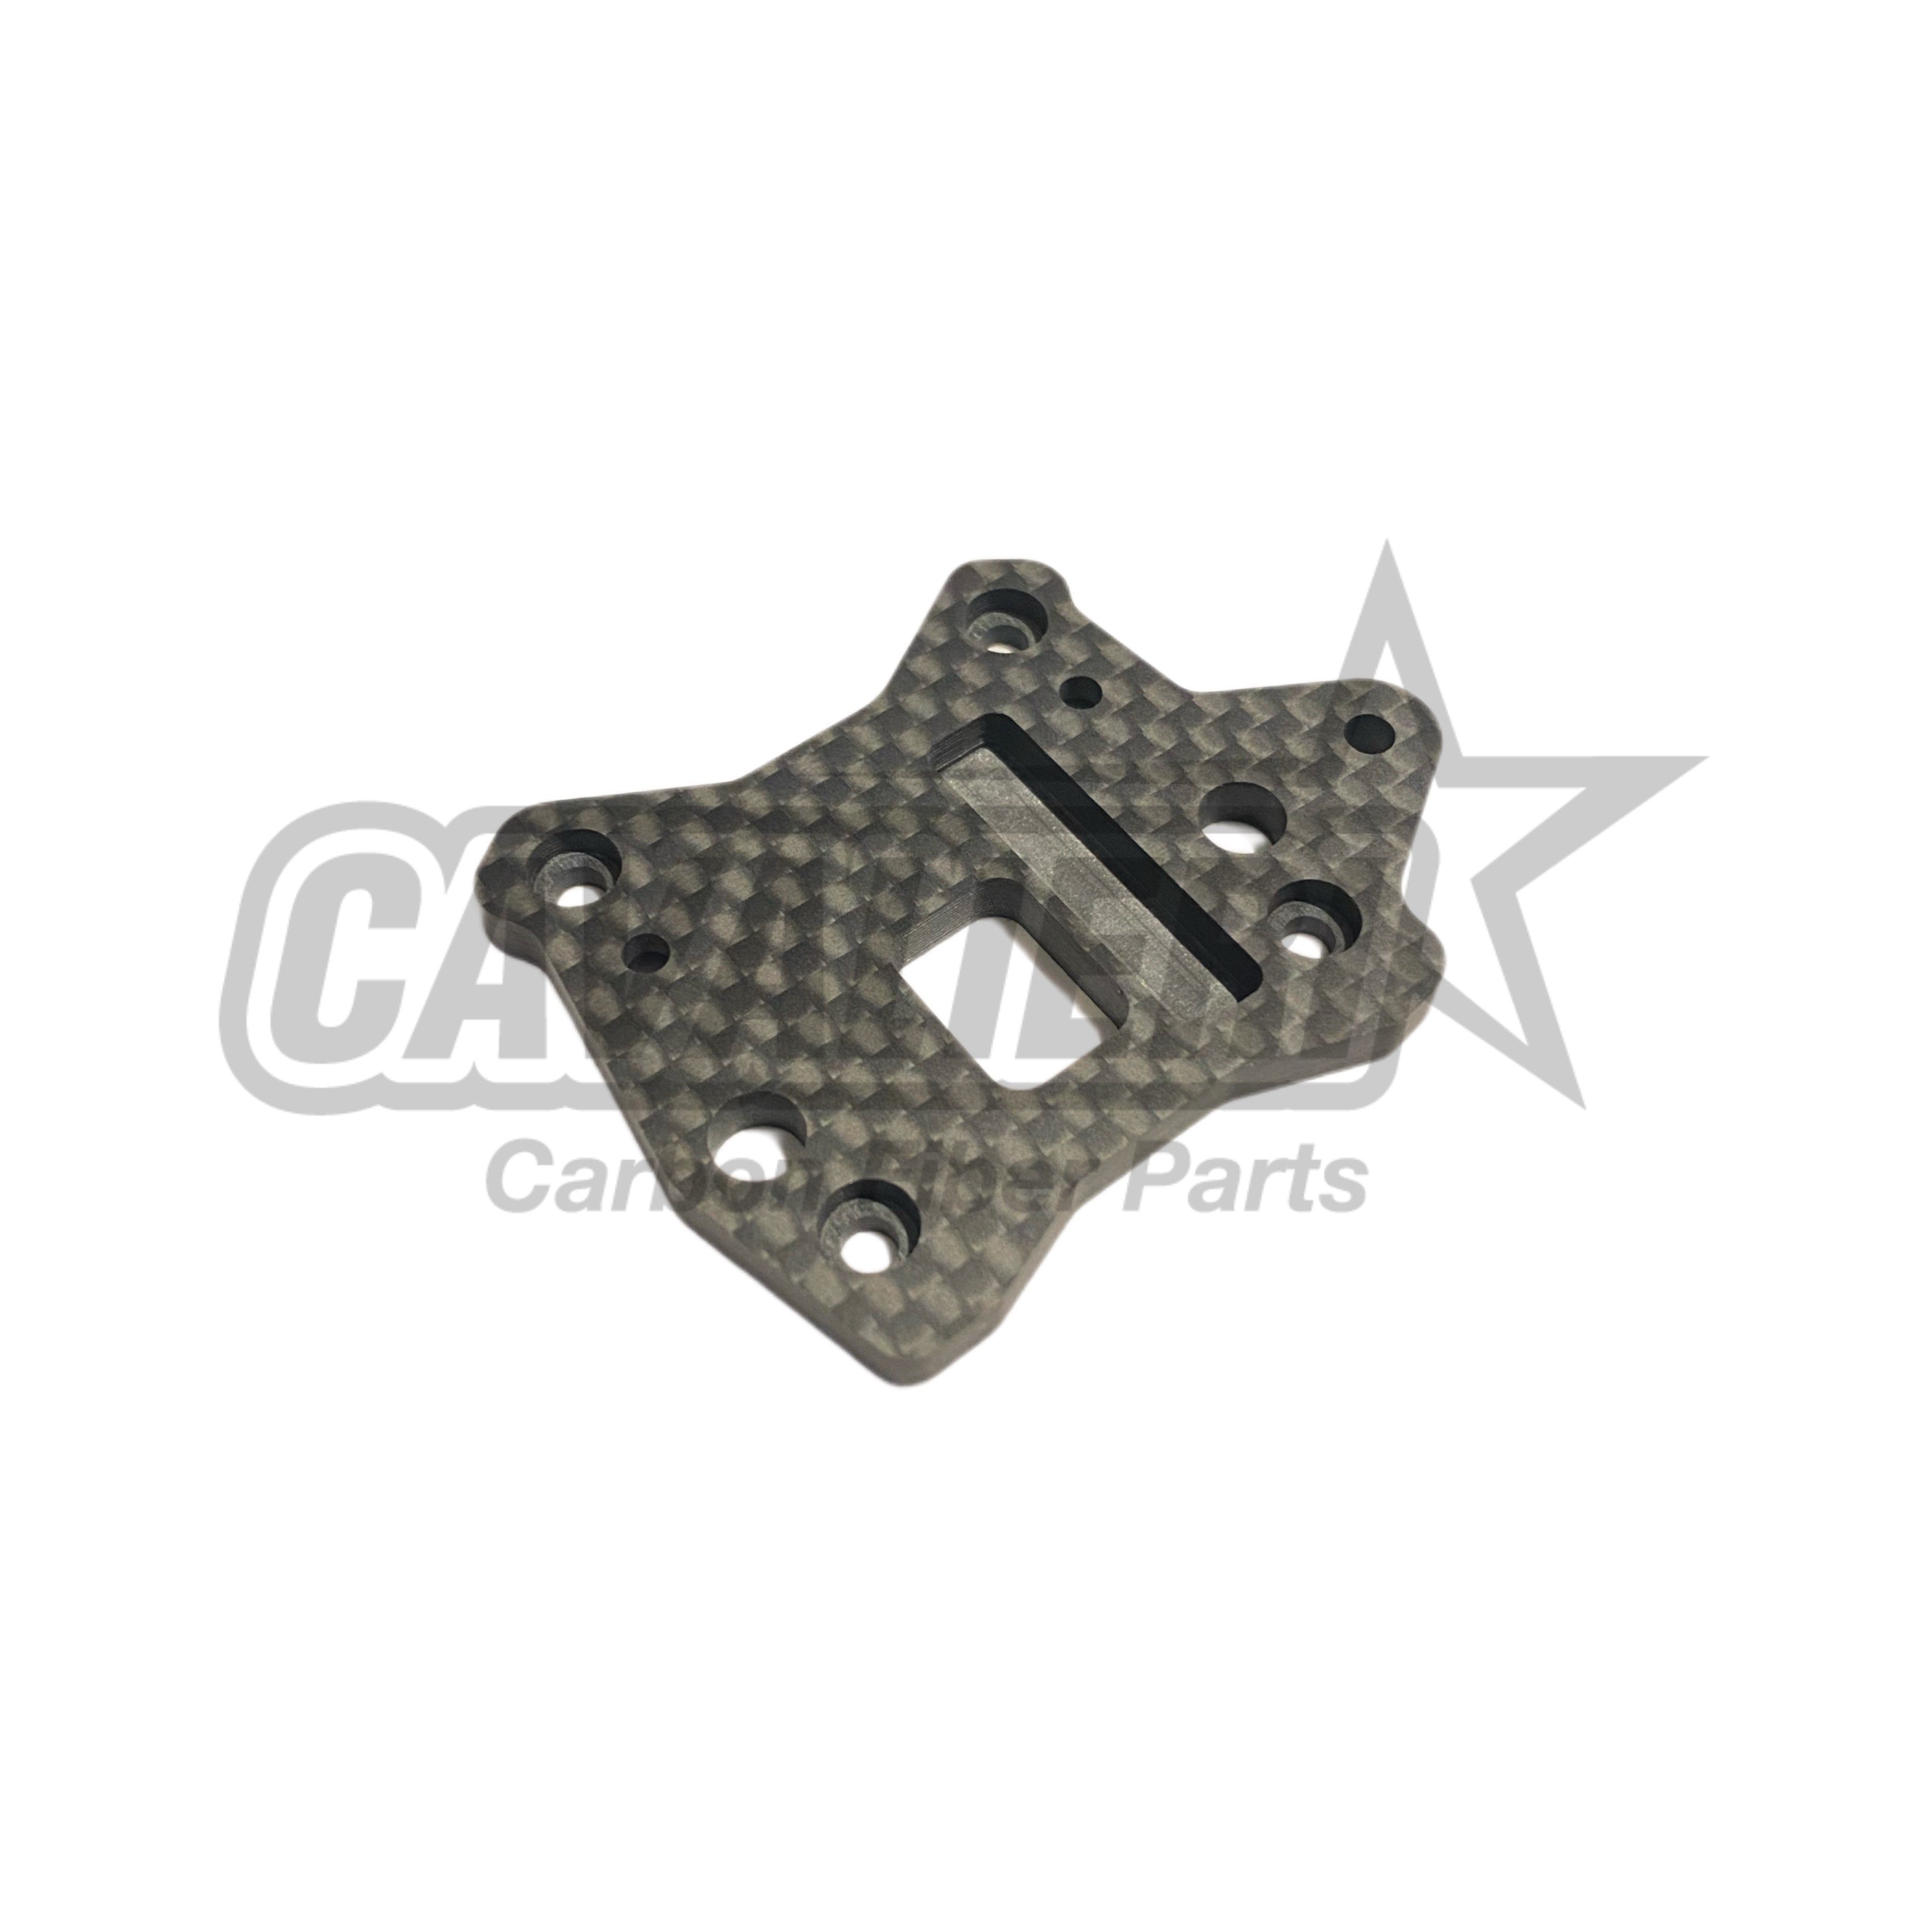 TLR 8IGHT X 2.0 Center Diff Plate